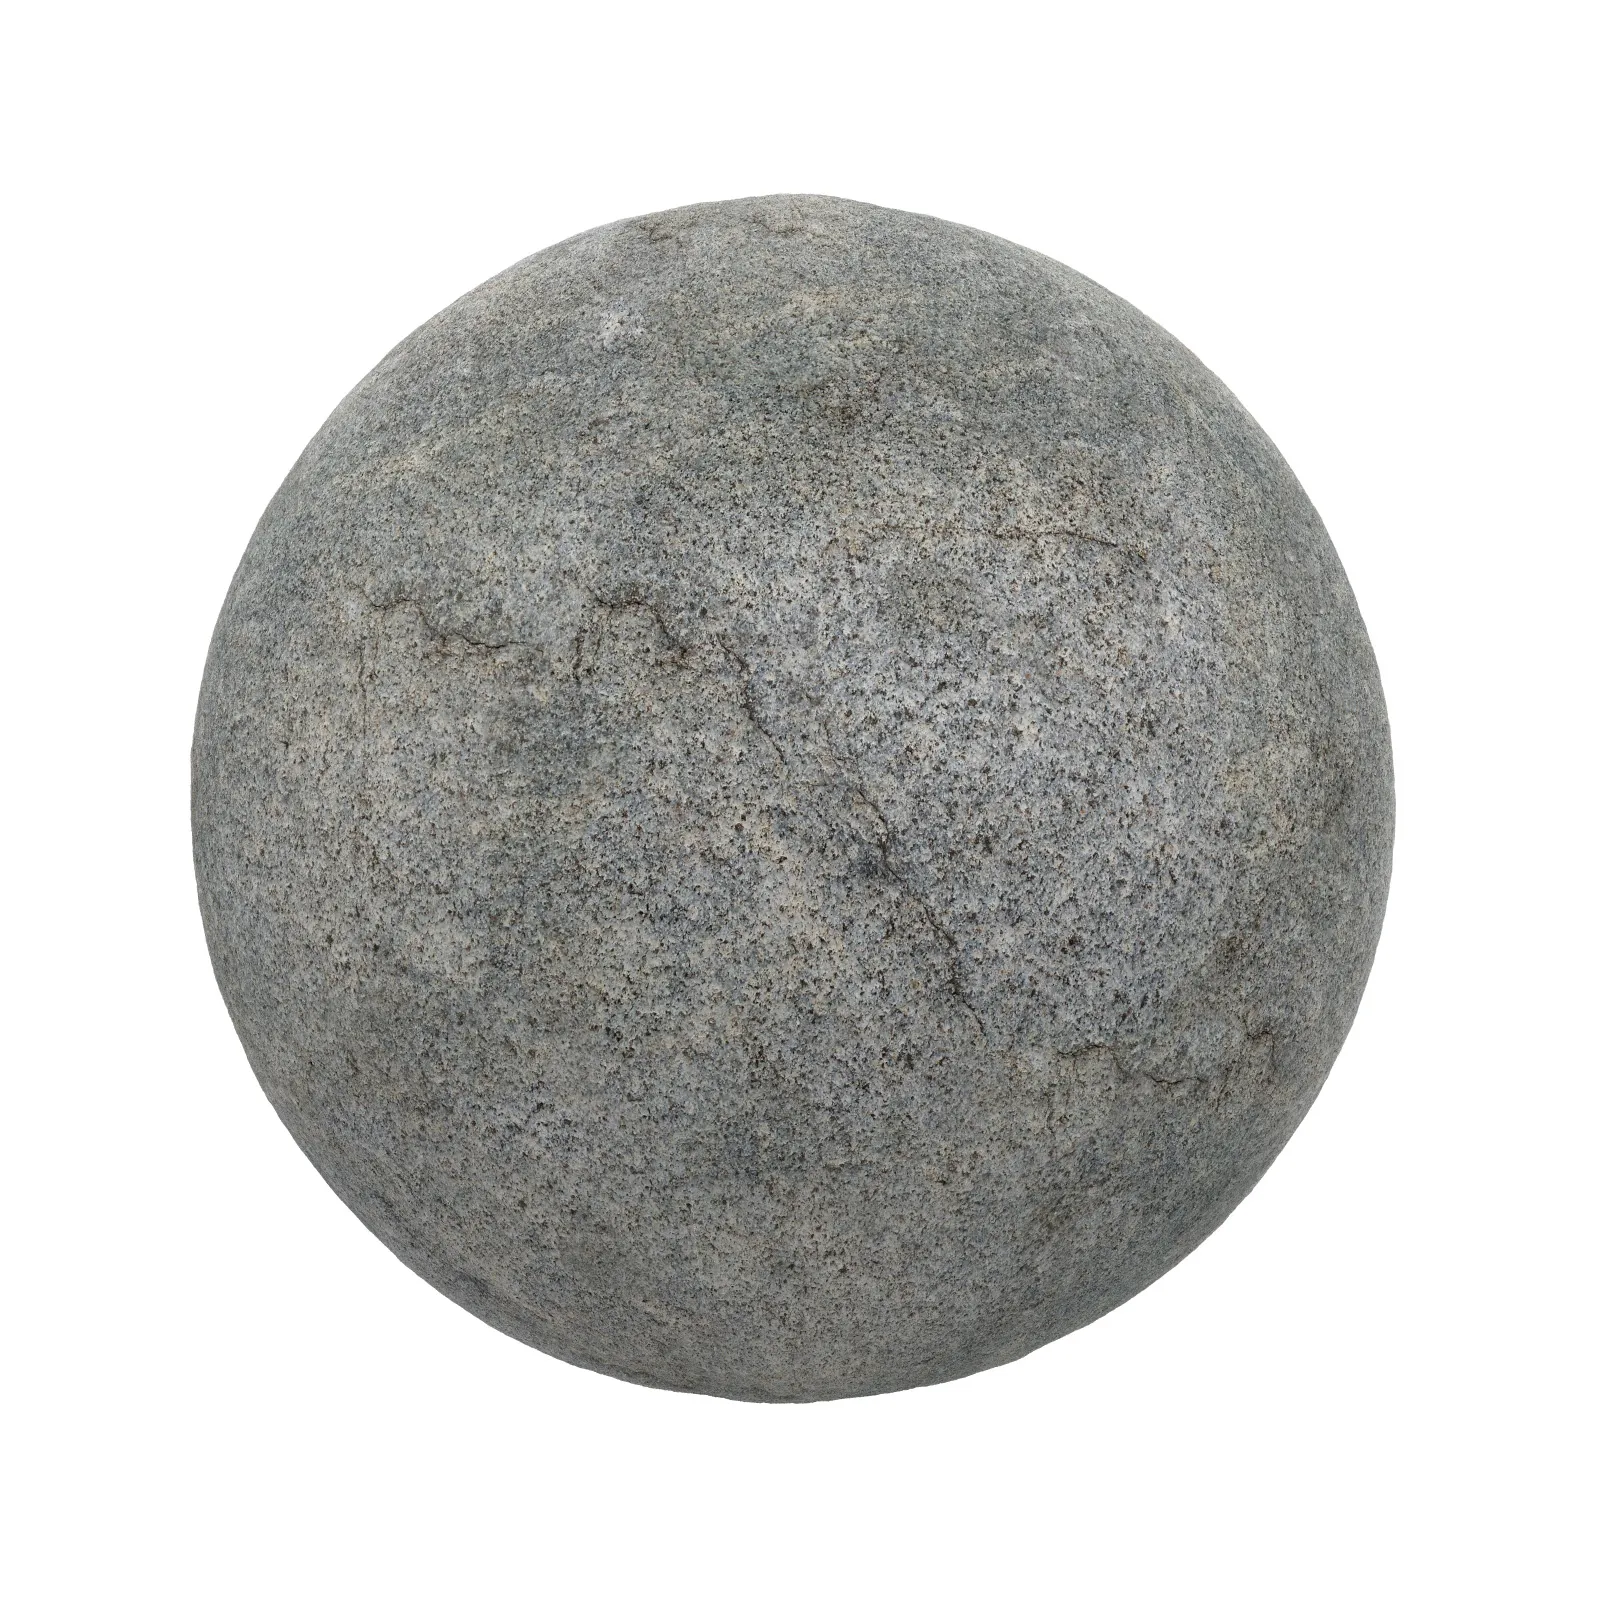 TEXTURES – STONES – CGAxis PBR Colection Vol 1 Stones – rough grey stone 1